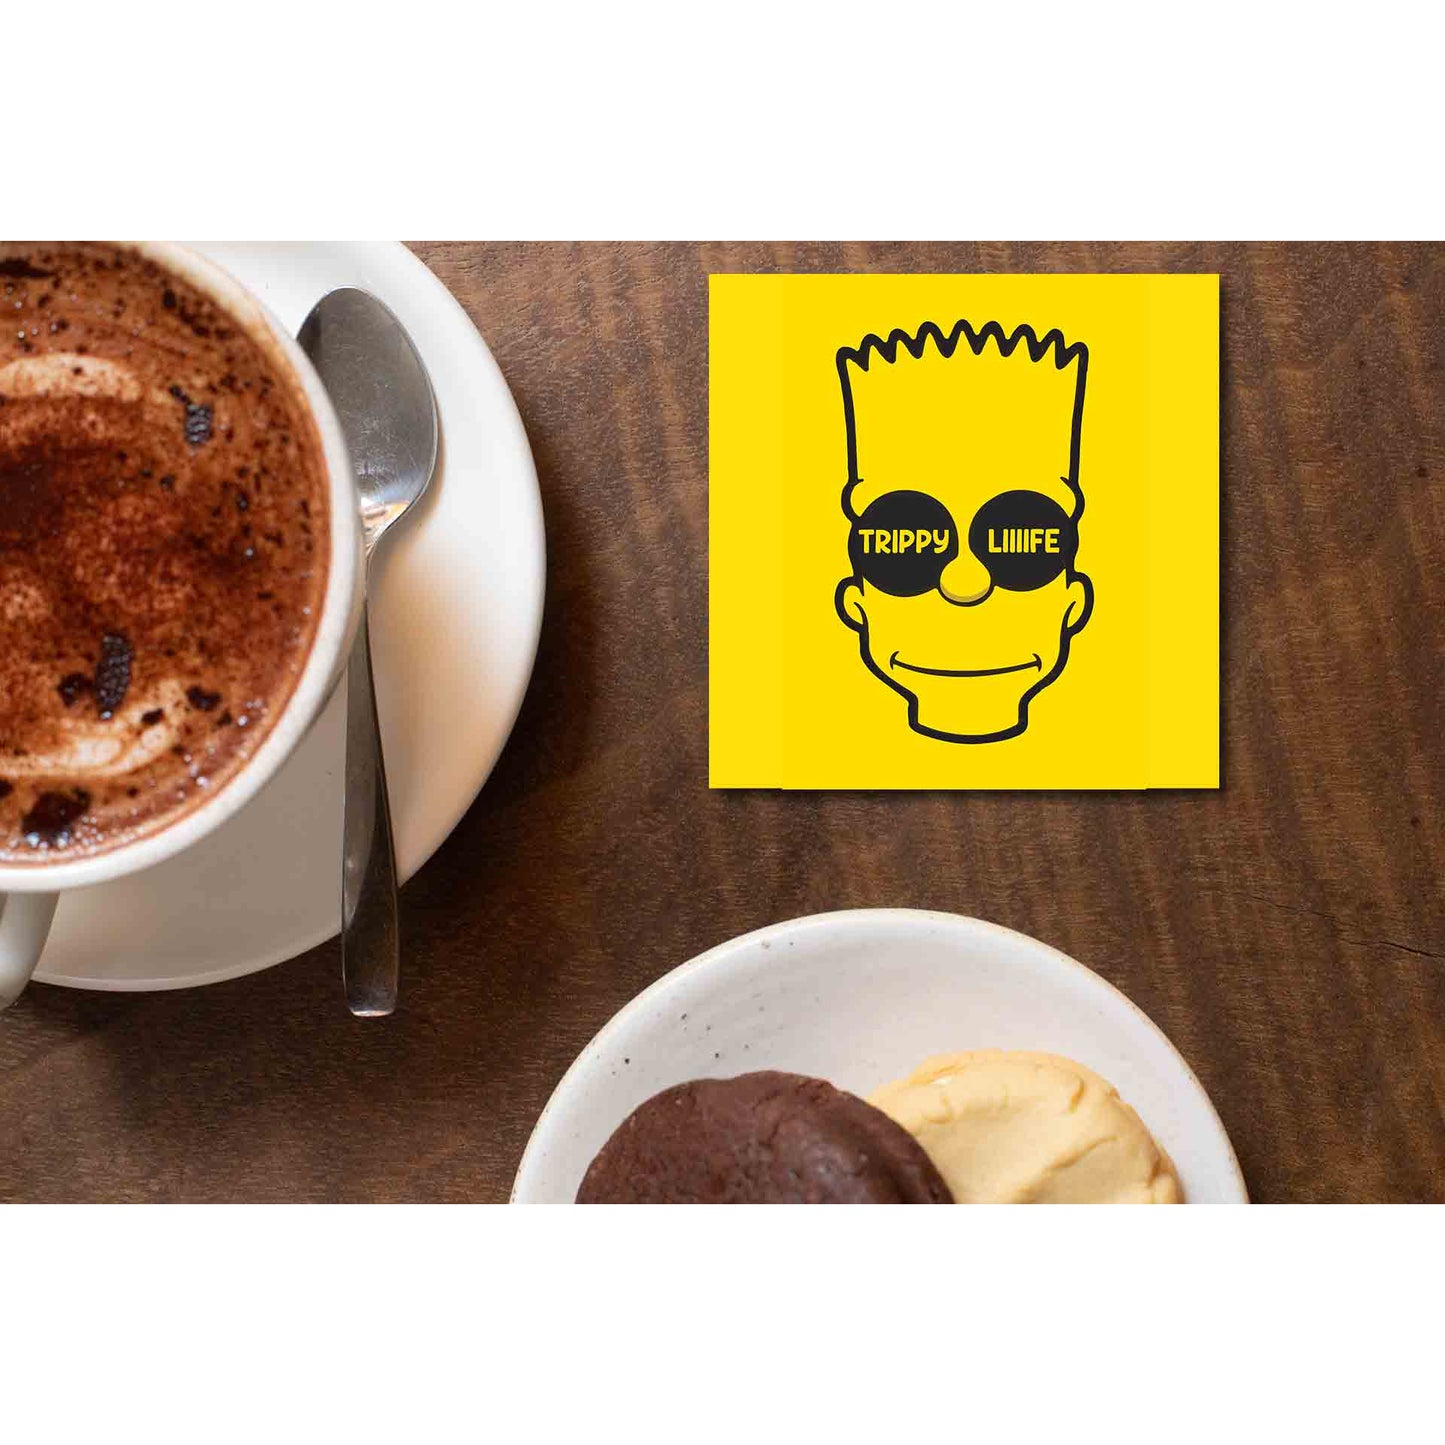 the simpsons trippy life coasters wooden table cups indian tv & movies buy online india the banyan tee tbt men women girls boys unisex  - bart simpson